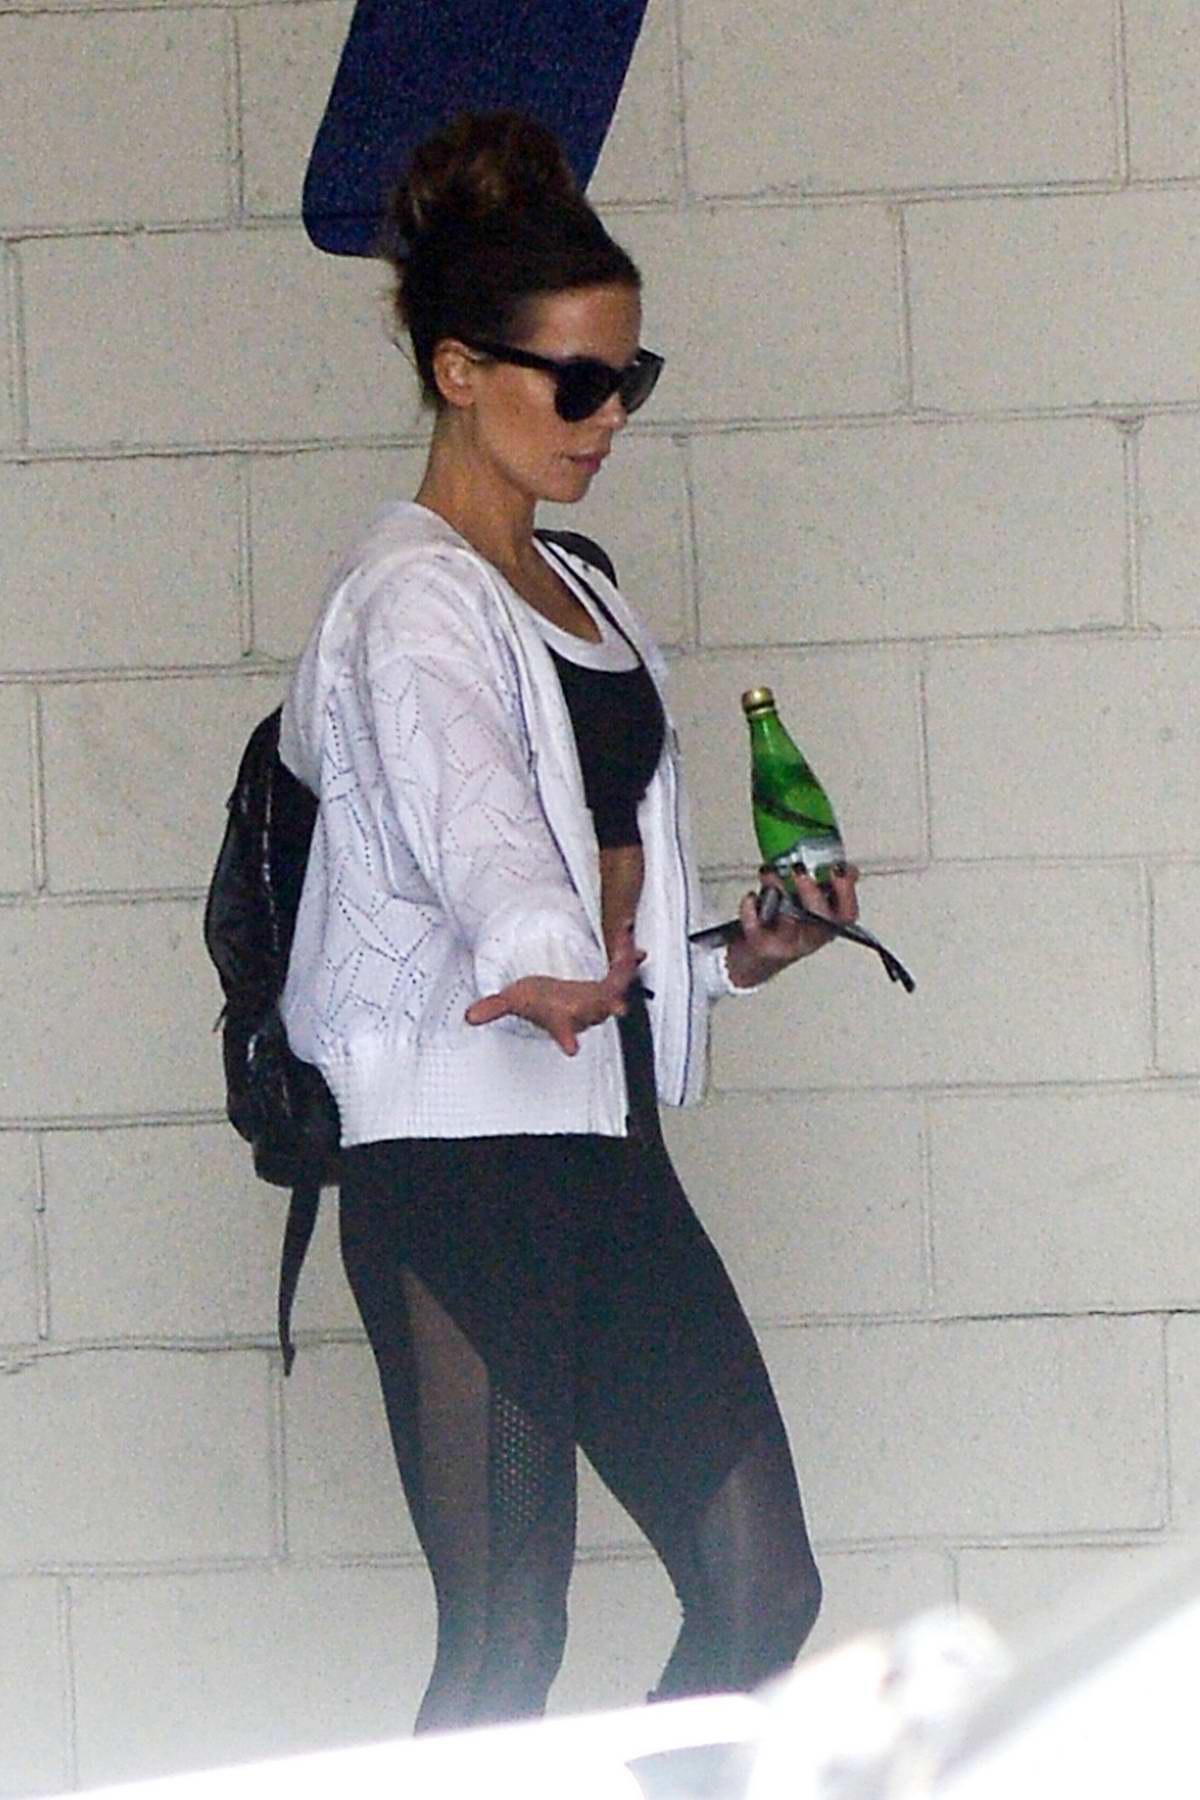 Kate Beckinsale wears a black sports bra with matching leggings